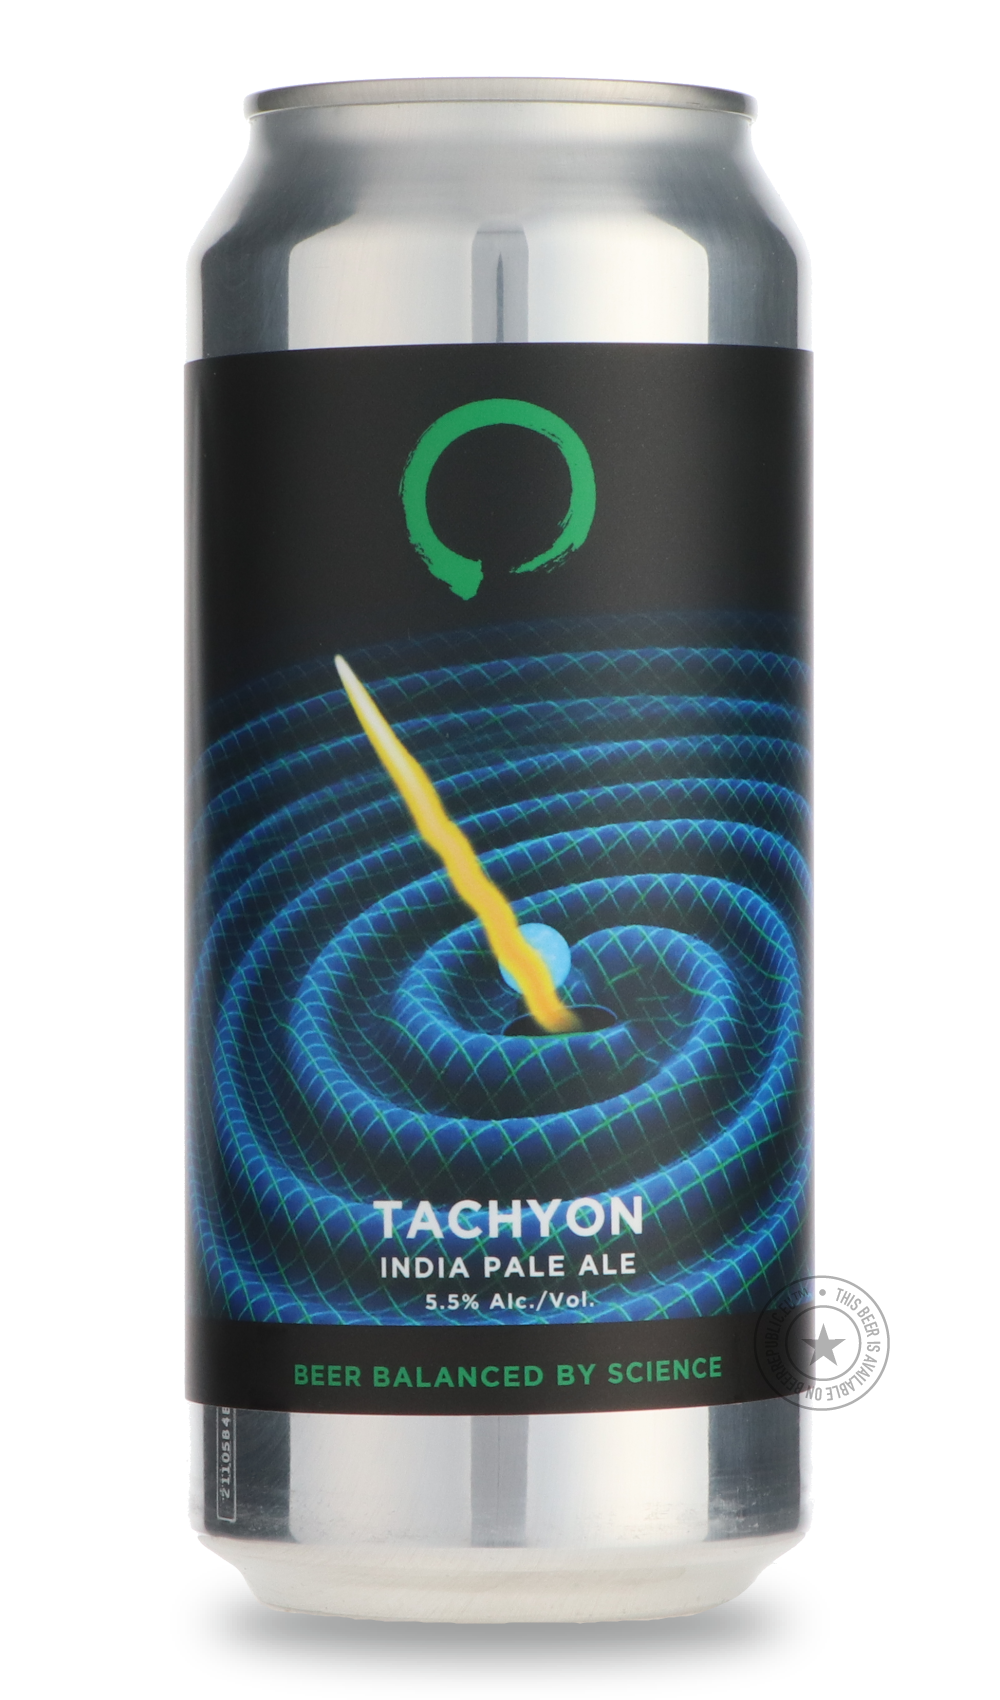 -Equilibrium- Tachyon-IPA- Only @ Beer Republic - The best online beer store for American & Canadian craft beer - Buy beer online from the USA and Canada - Bier online kopen - Amerikaans bier kopen - Craft beer store - Craft beer kopen - Amerikanisch bier kaufen - Bier online kaufen - Acheter biere online - IPA - Stout - Porter - New England IPA - Hazy IPA - Imperial Stout - Barrel Aged - Barrel Aged Imperial Stout - Brown - Dark beer - Blond - Blonde - Pilsner - Lager - Wheat - Weizen - Amber - Barley Wine